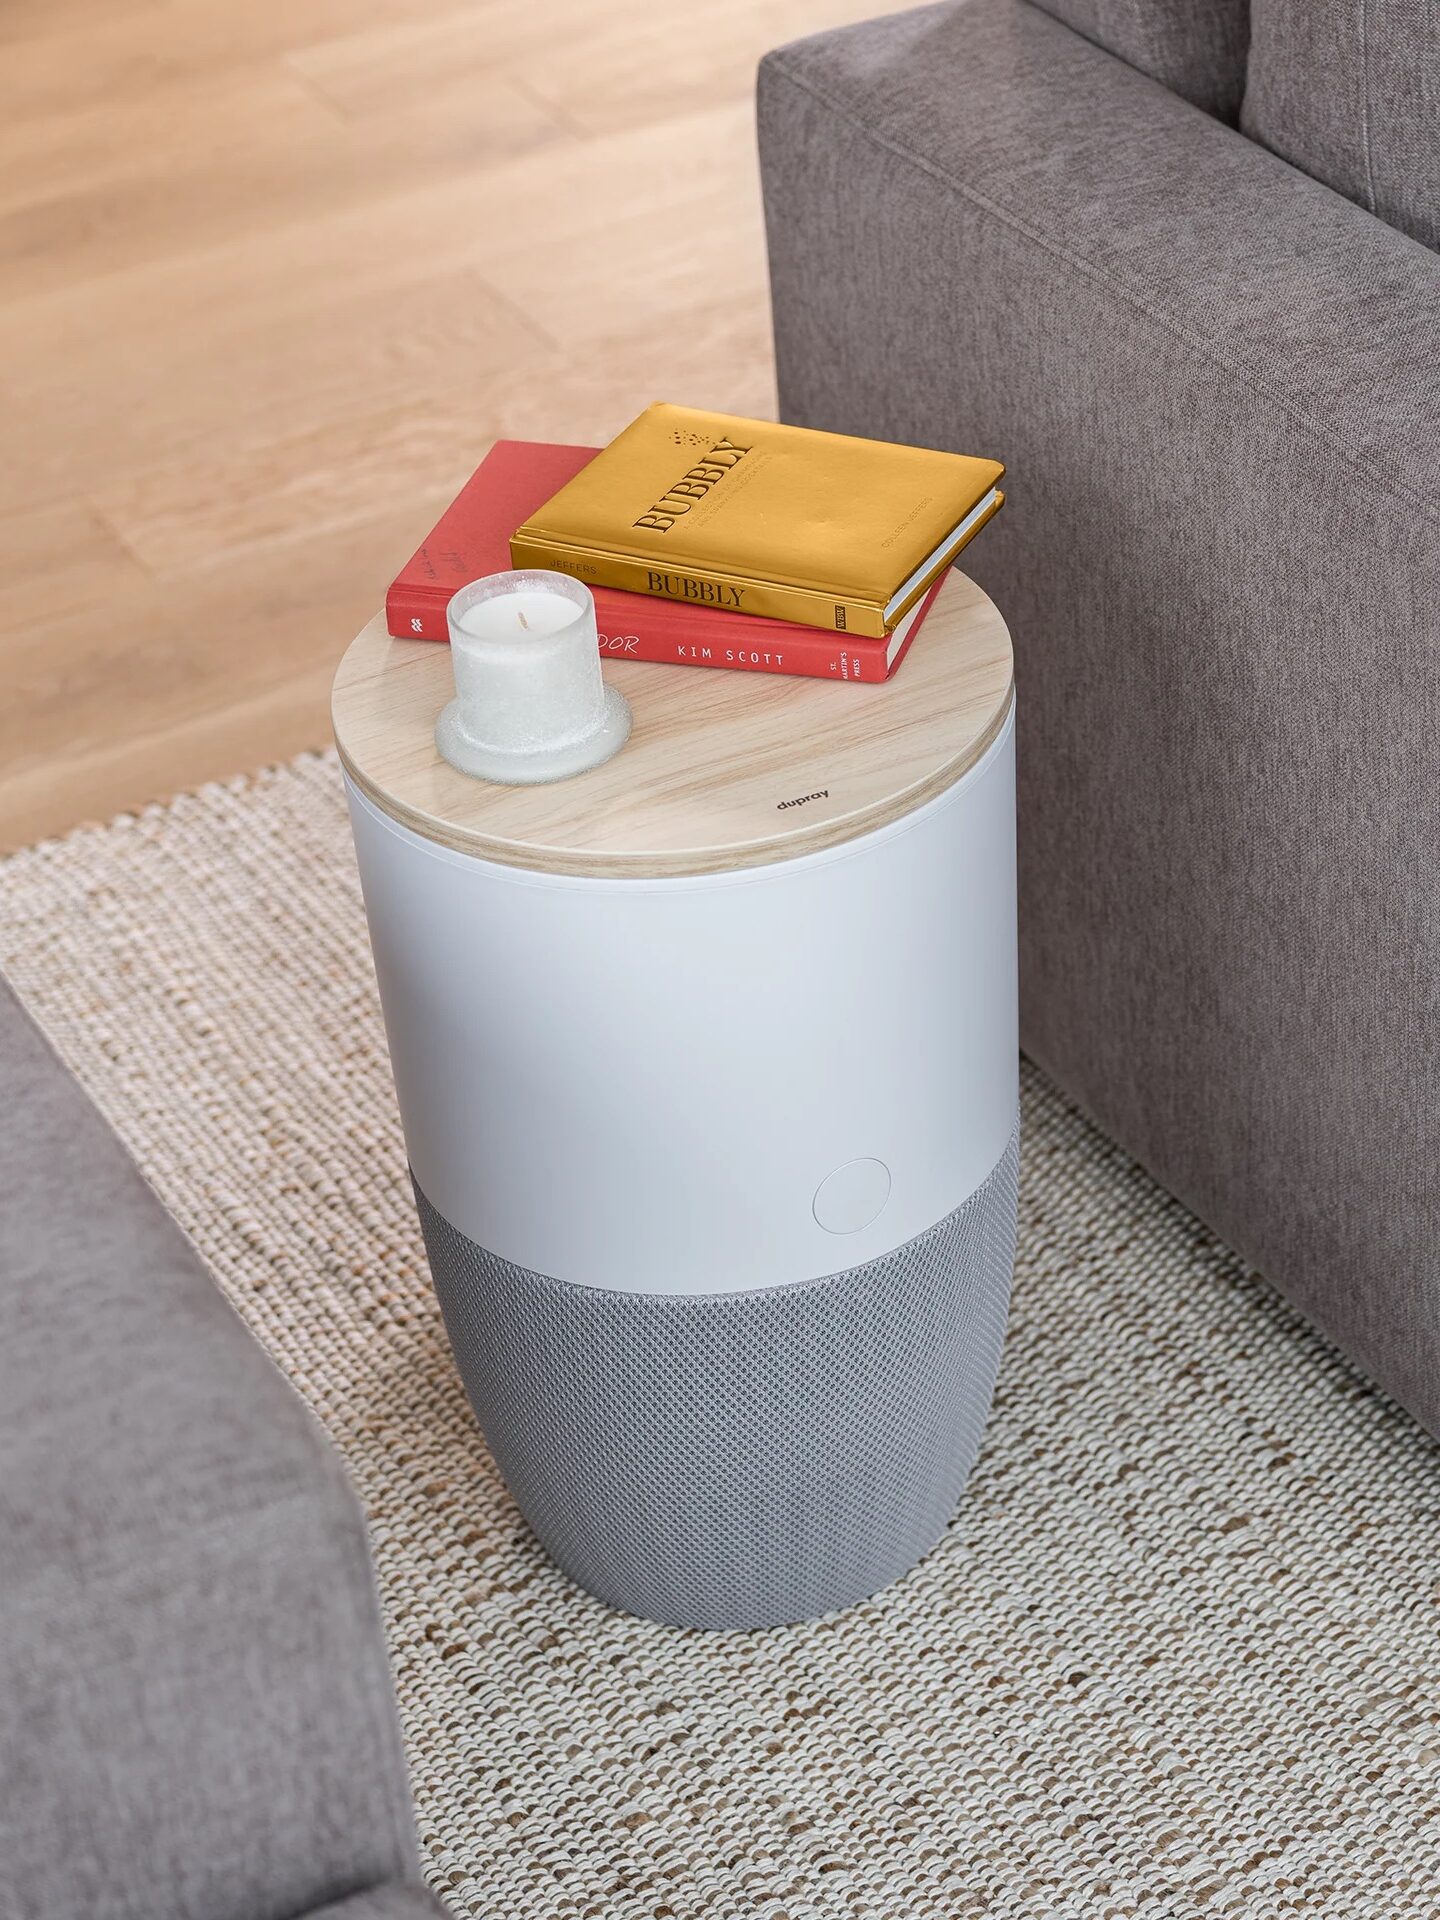 Modern minimalist side table with storage, featuring a book and cup on top, beside a gray sofa.